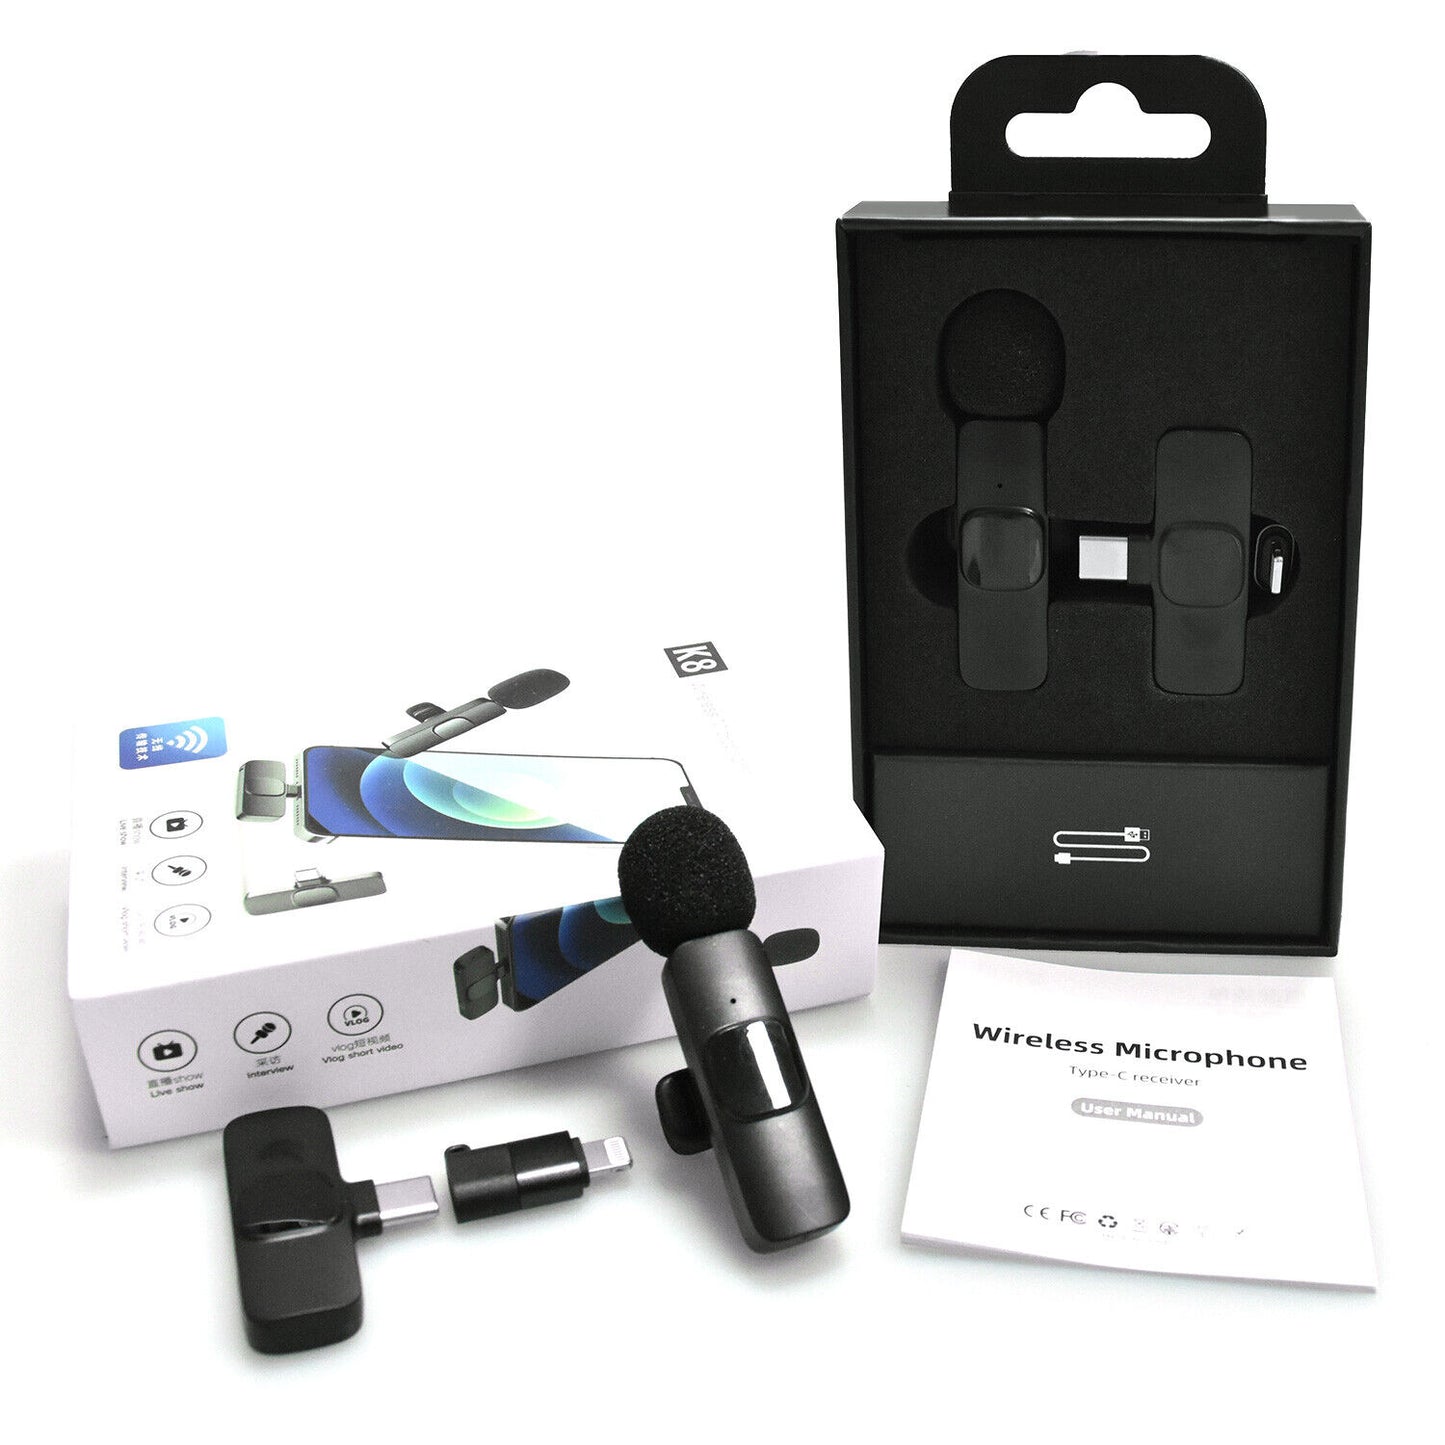 Lavalier Mini Wireless Microphone - for iPhone